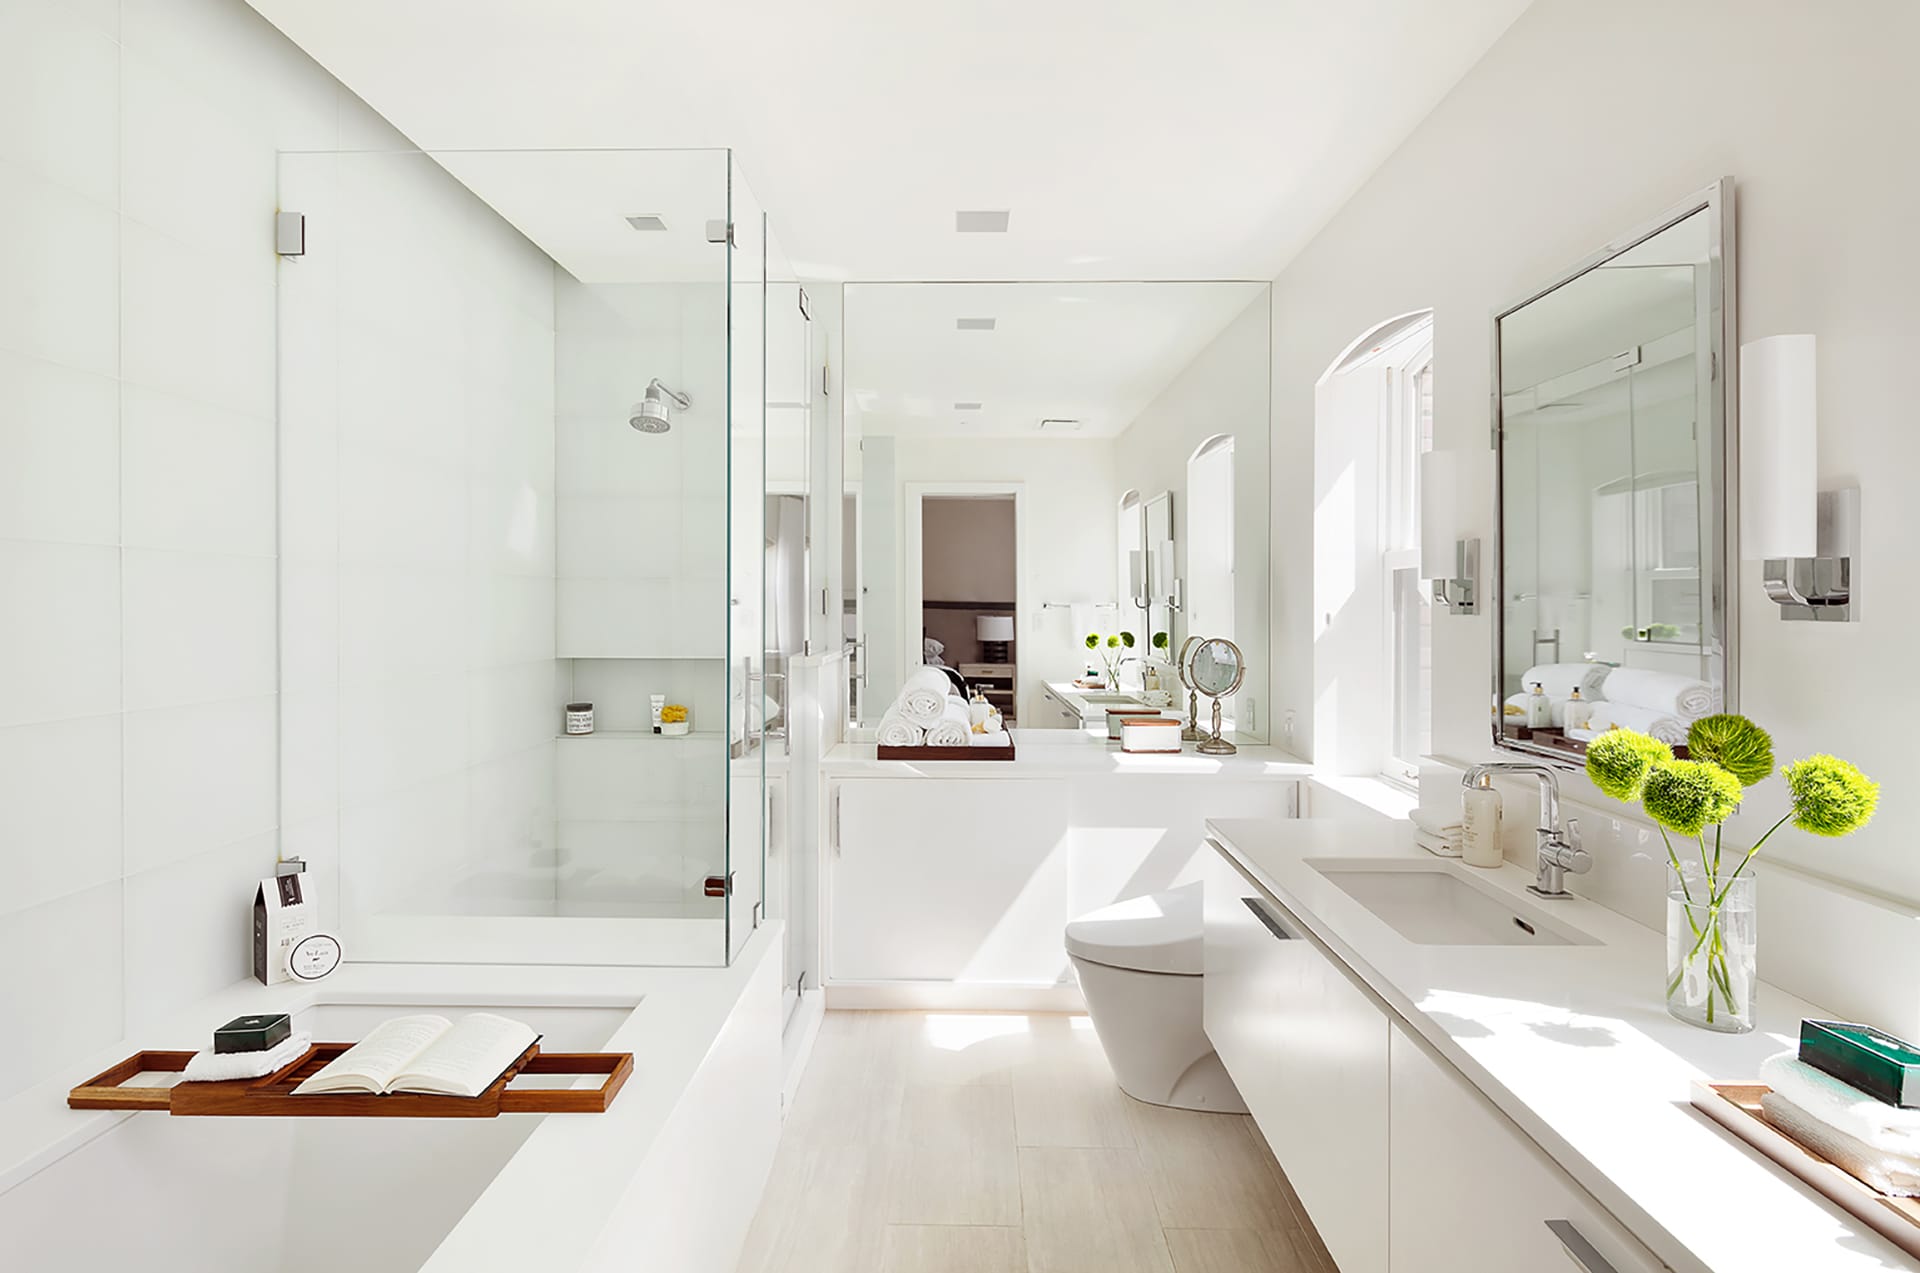 All-white primary bathroom with chrome furnishings